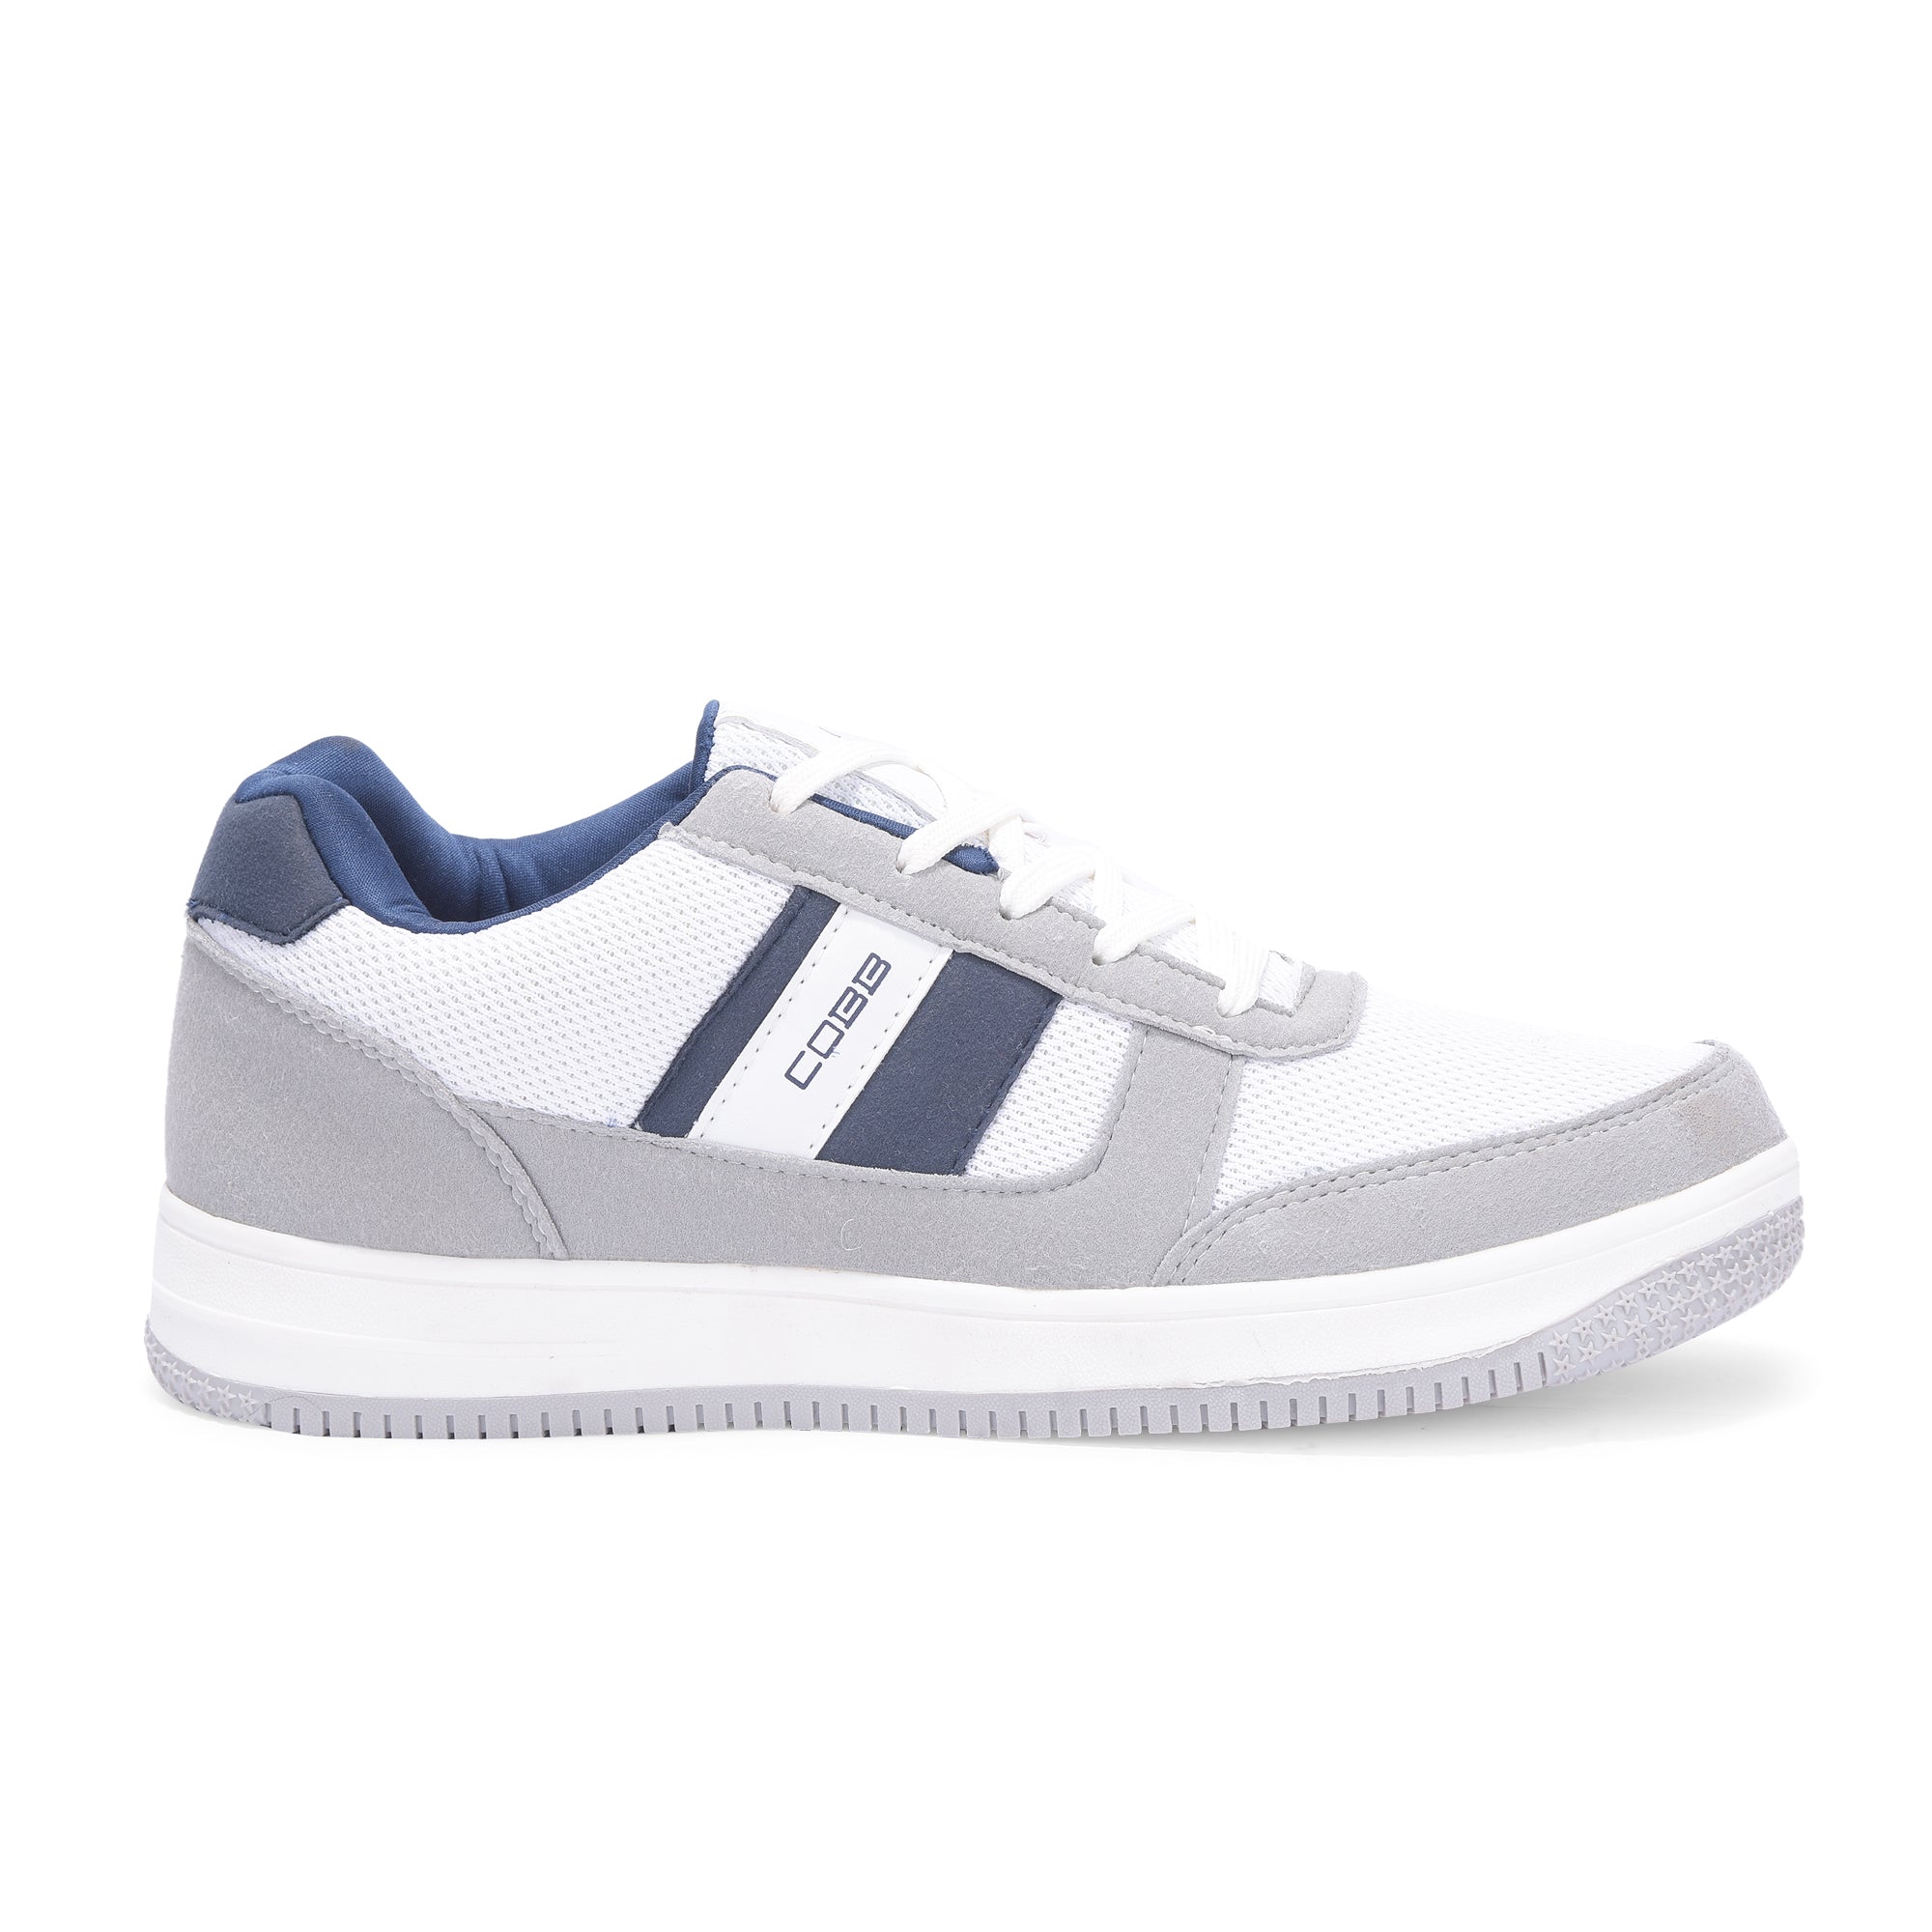 COBB WHITE GREY CASUAL SHOES